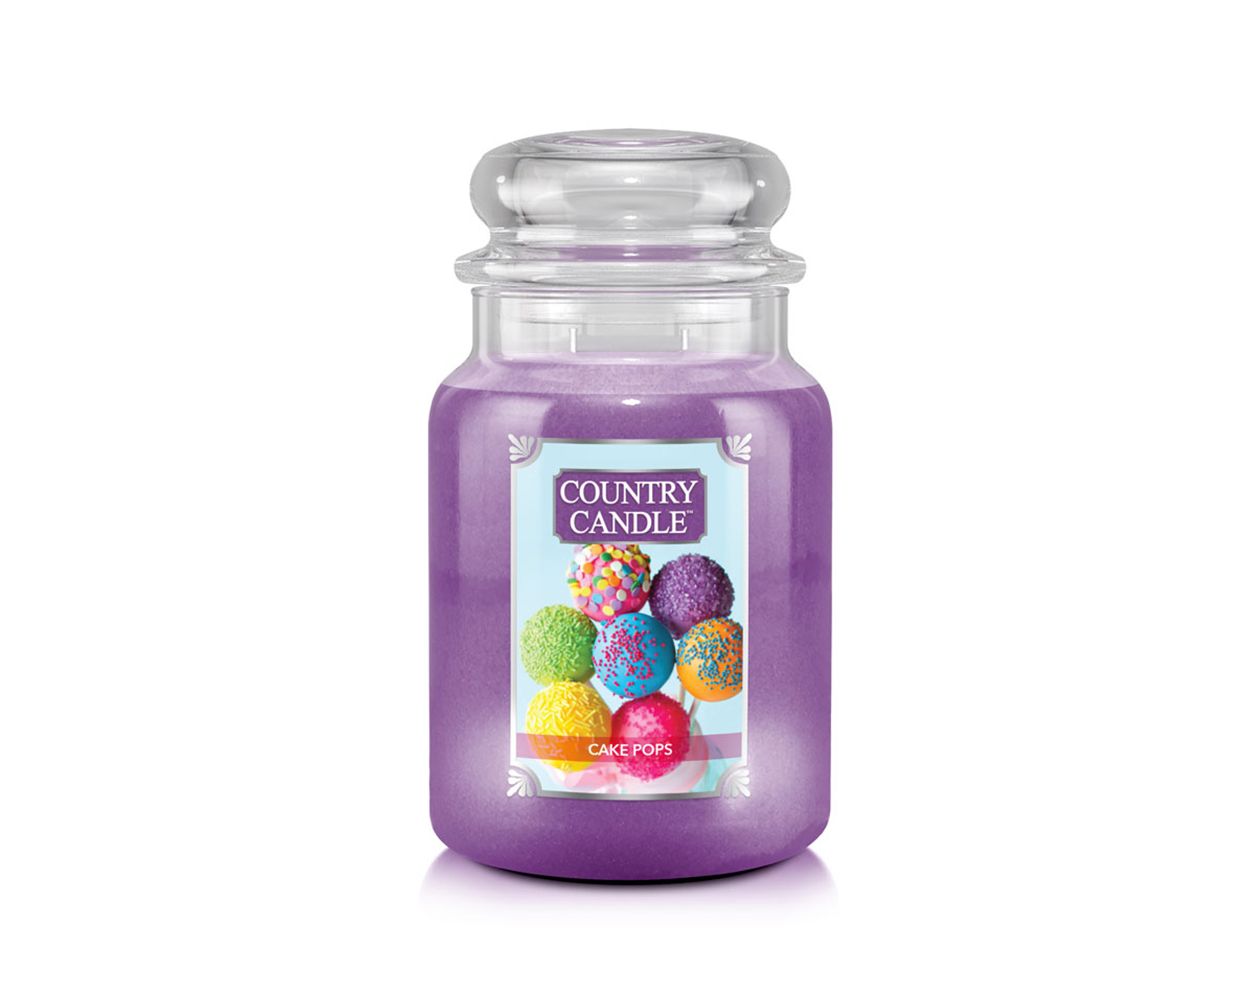 Cake Pops Duftkerze von Country Candle